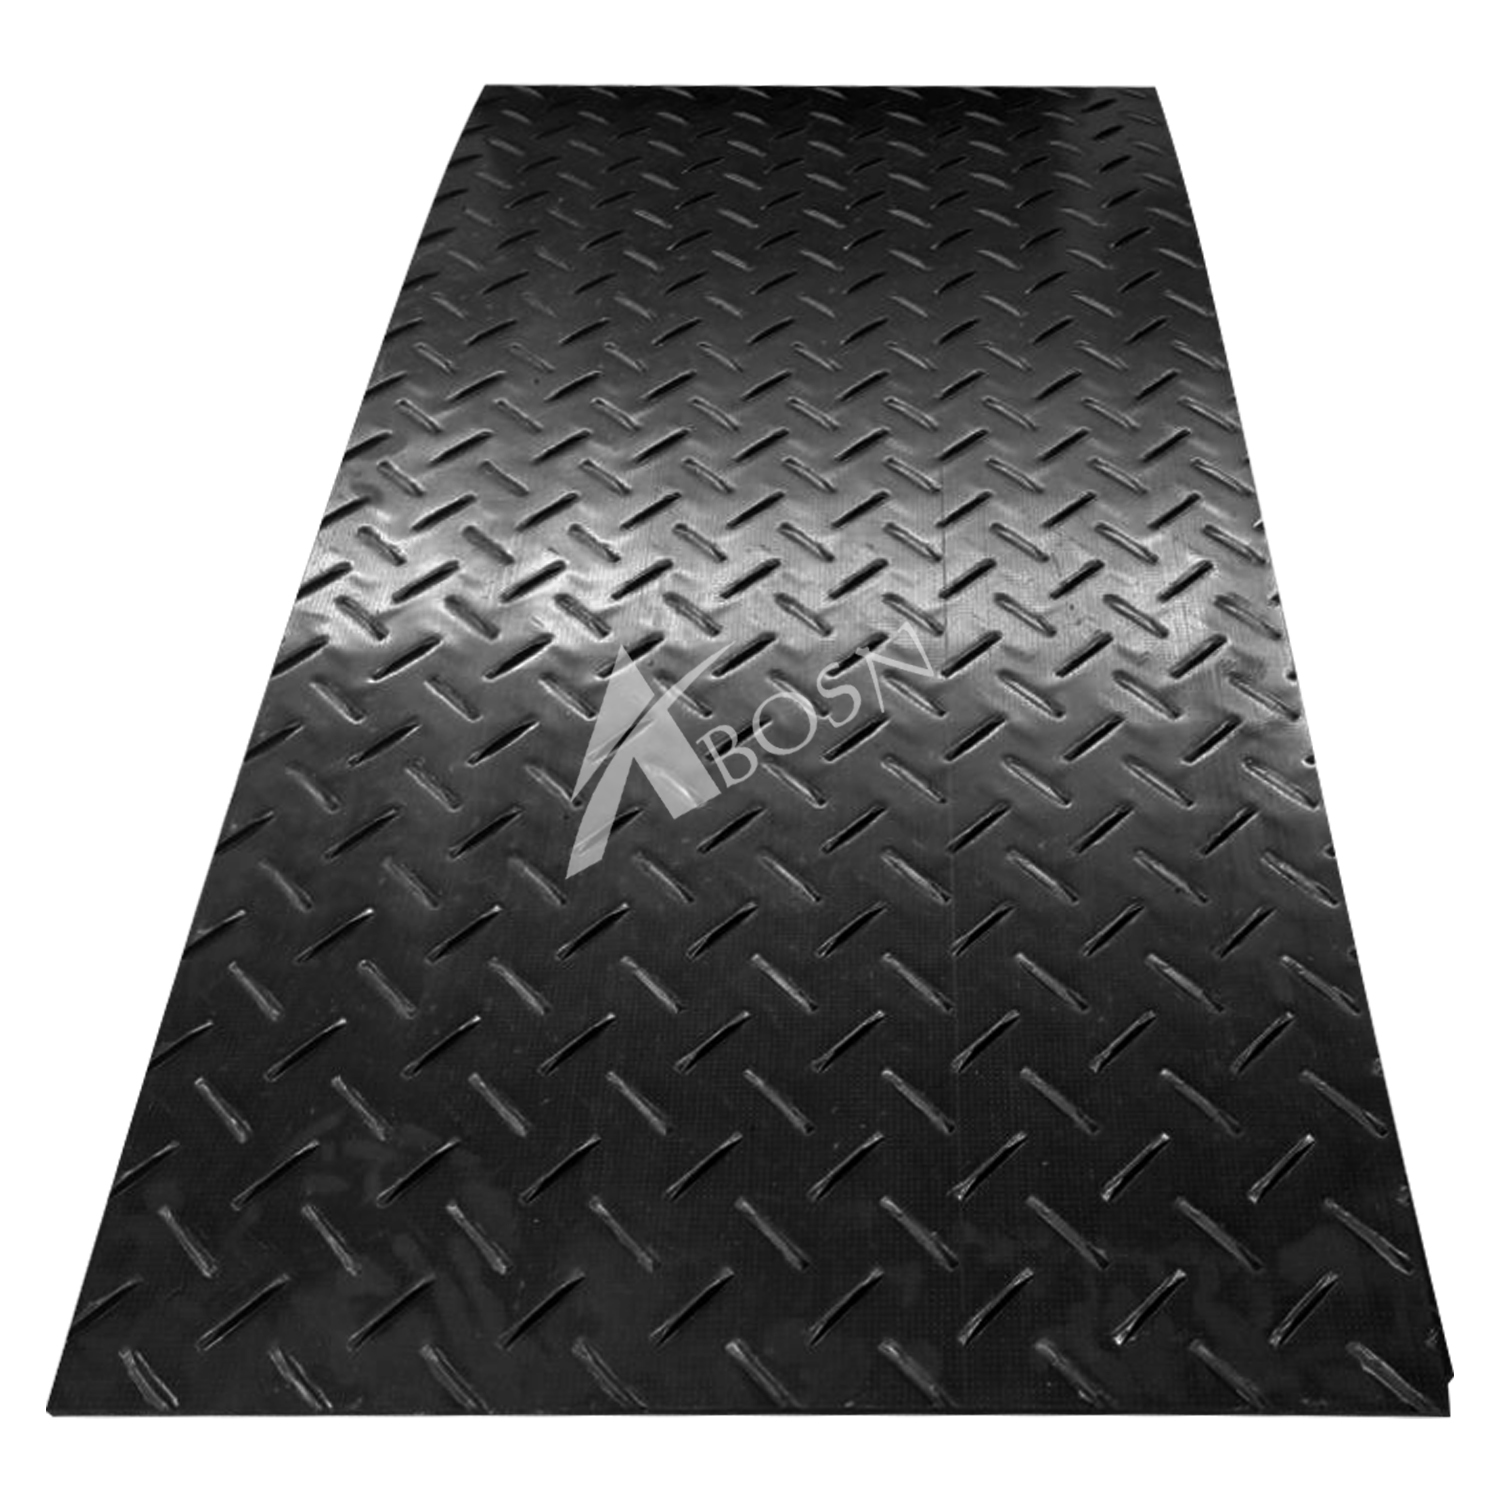 1/2′ Thickness Customized HDPE Ground Protection Mat with Handles Connectors for Lawn